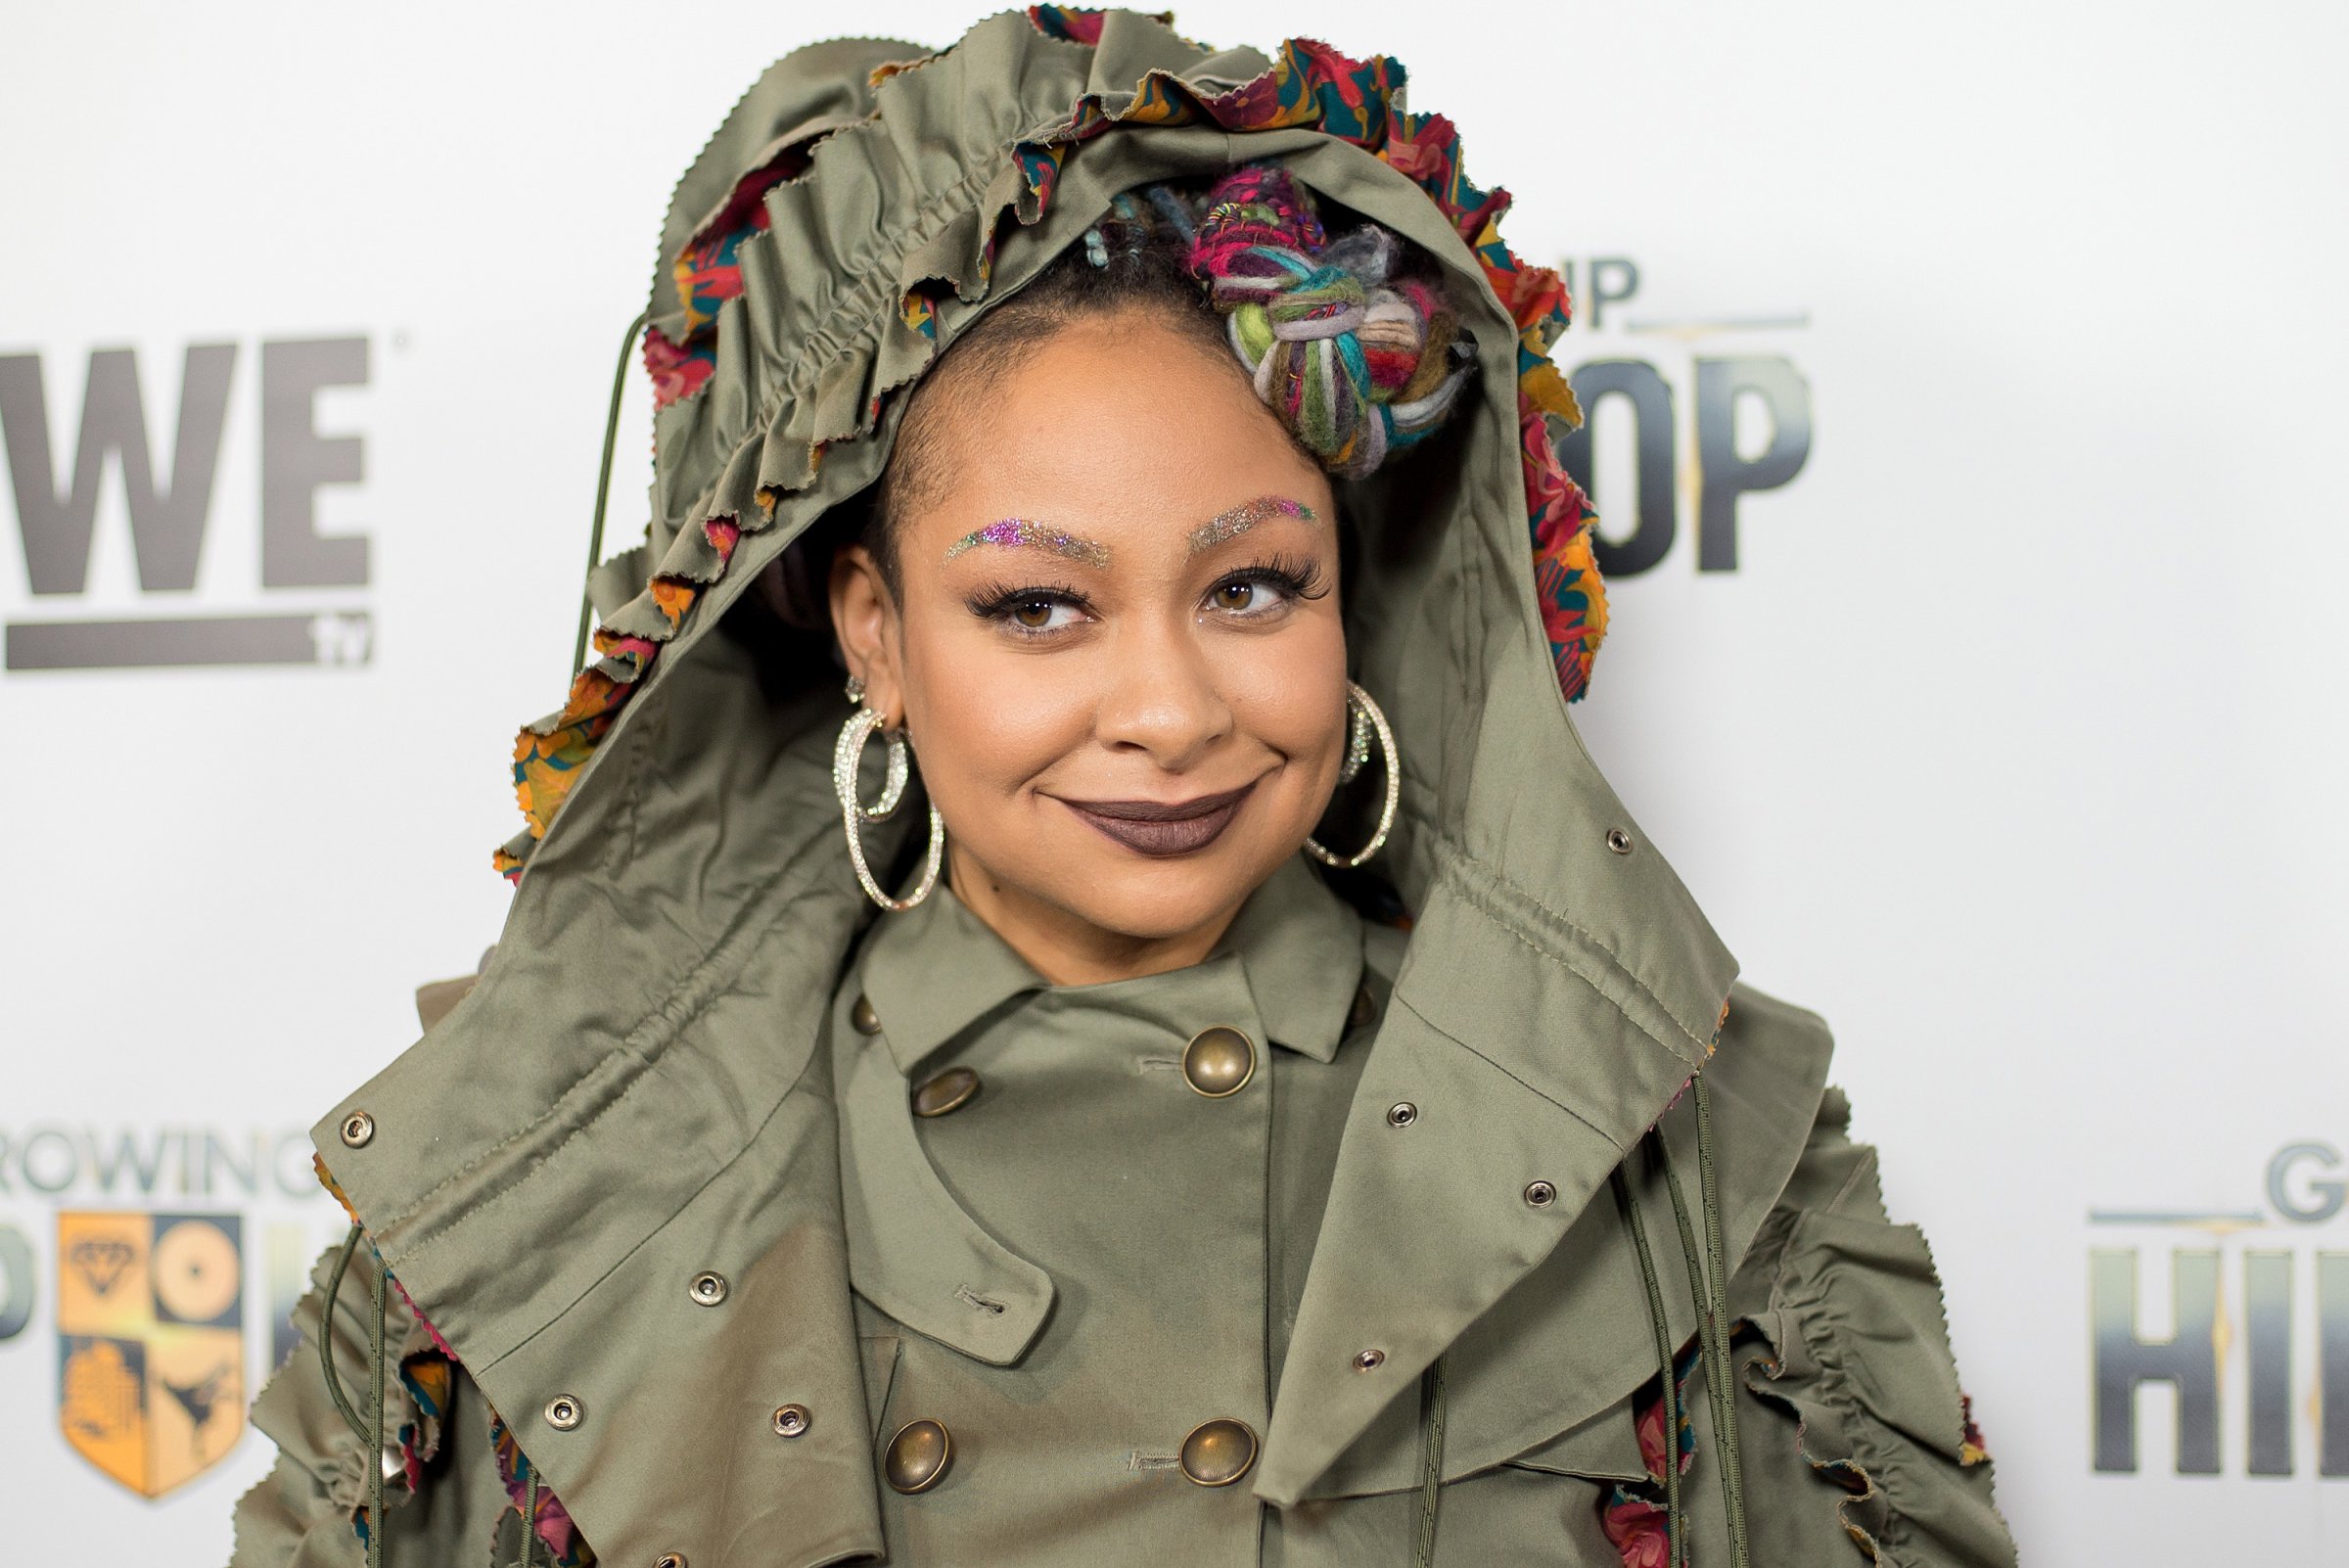 Raven-Symone attends WE tv's "Growing Up Hip Hop" premiere party at Haus on December 10, 2015 in New York City.